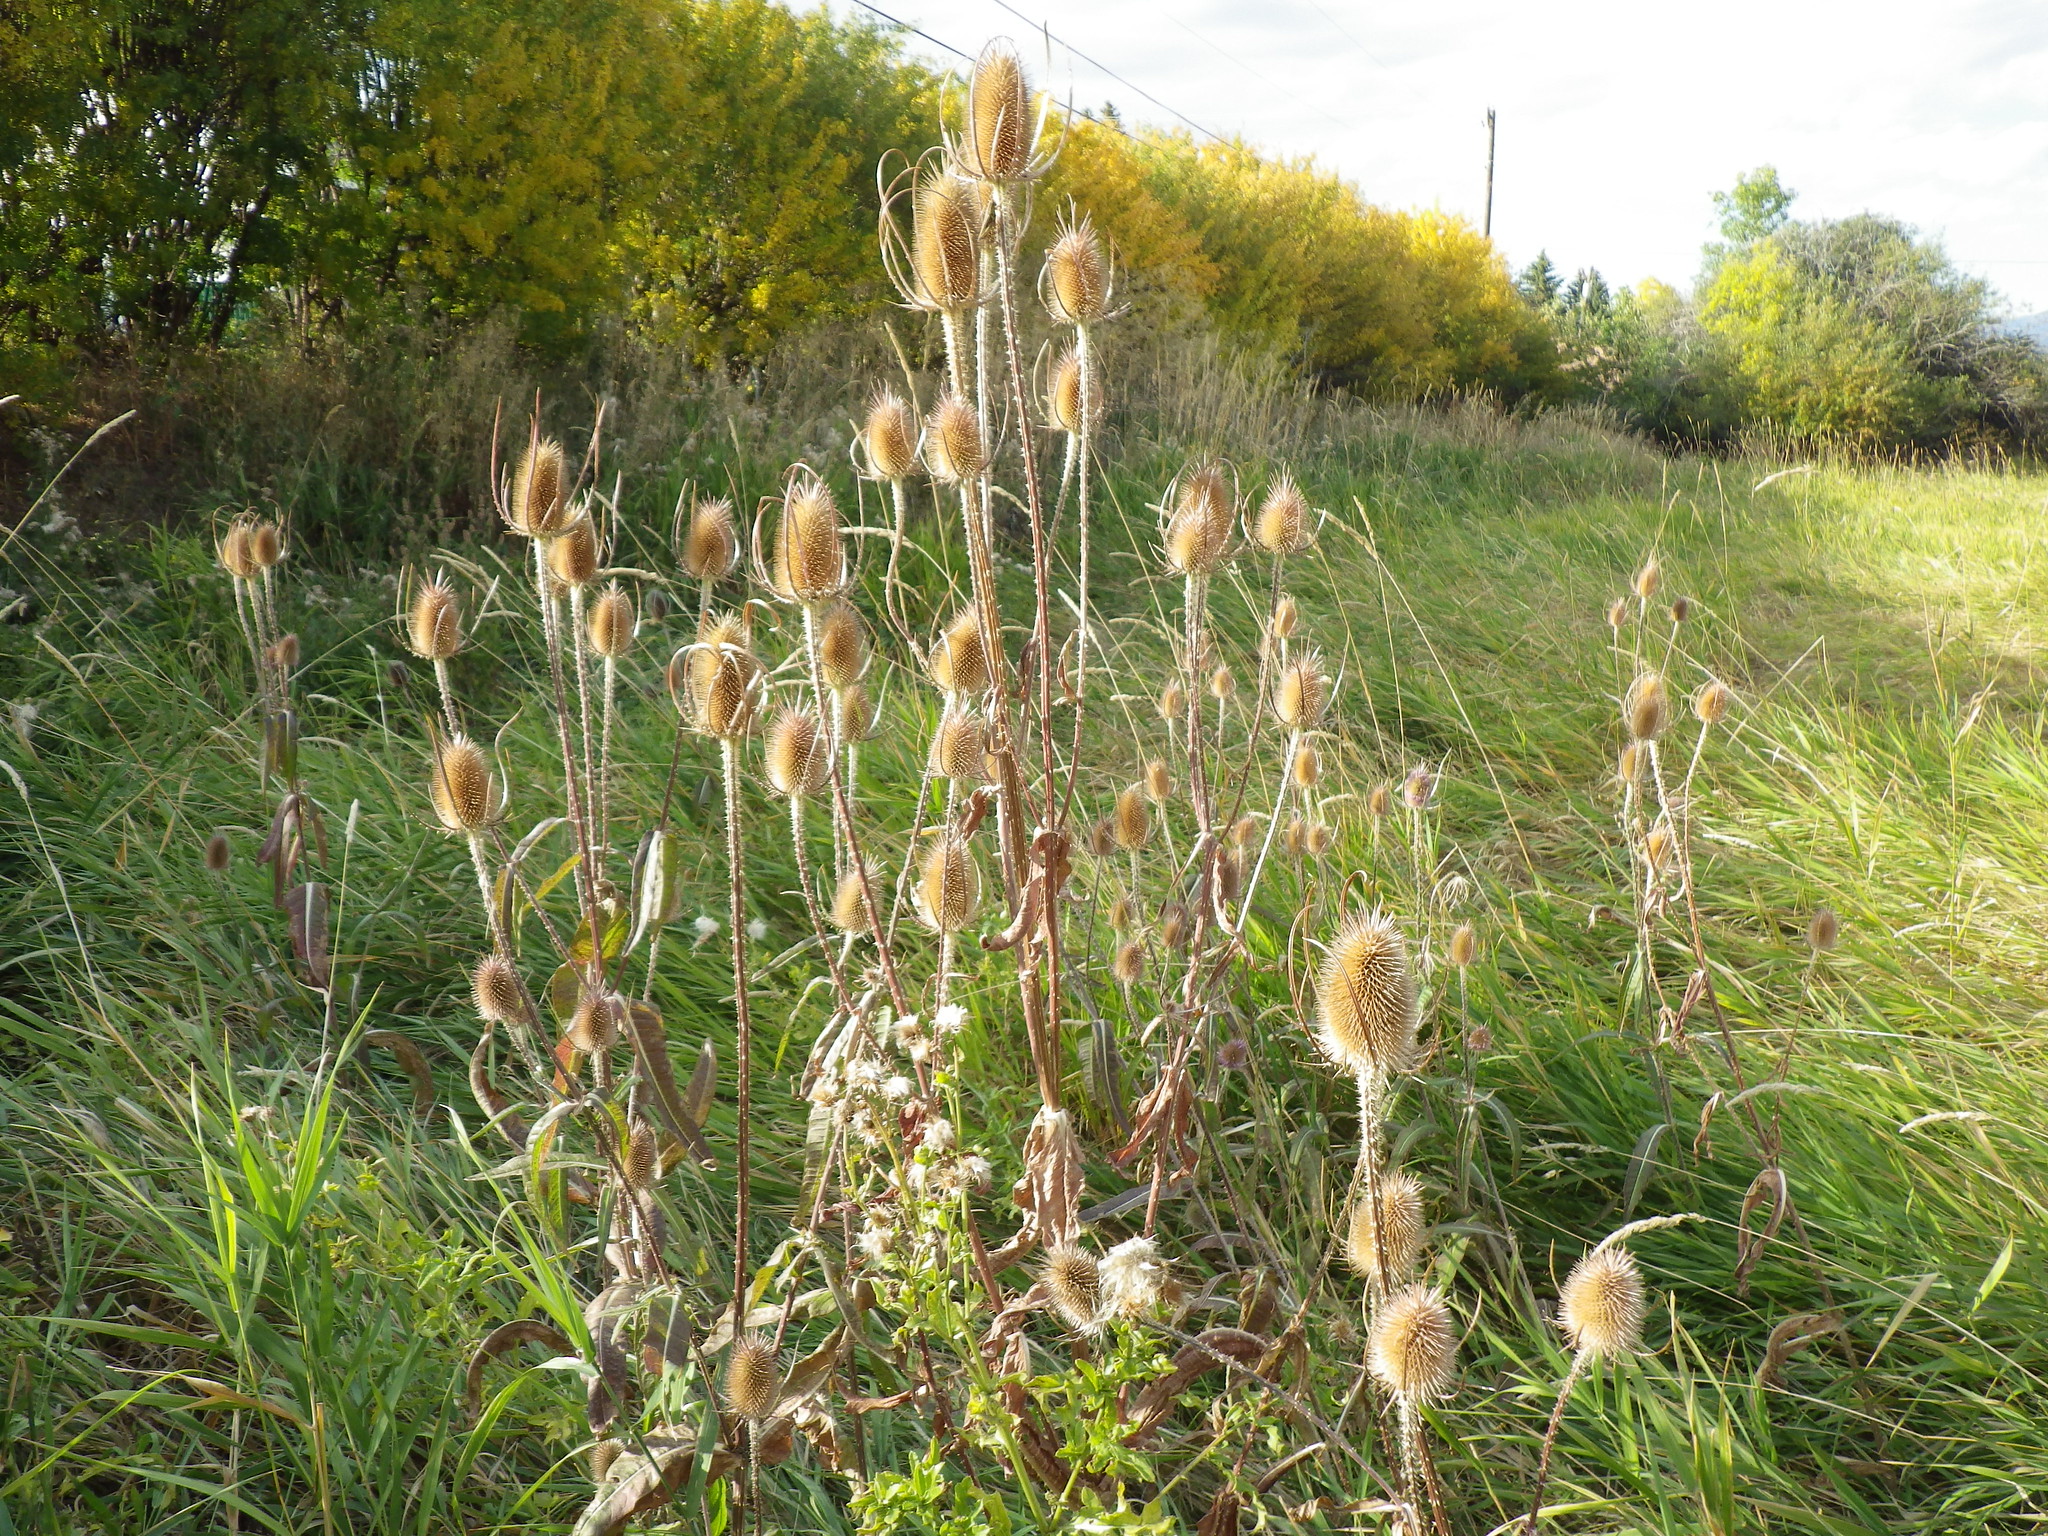 Dry, brown, prickly stems and heads of common teasel growing in green grass with row of shrubs in background.